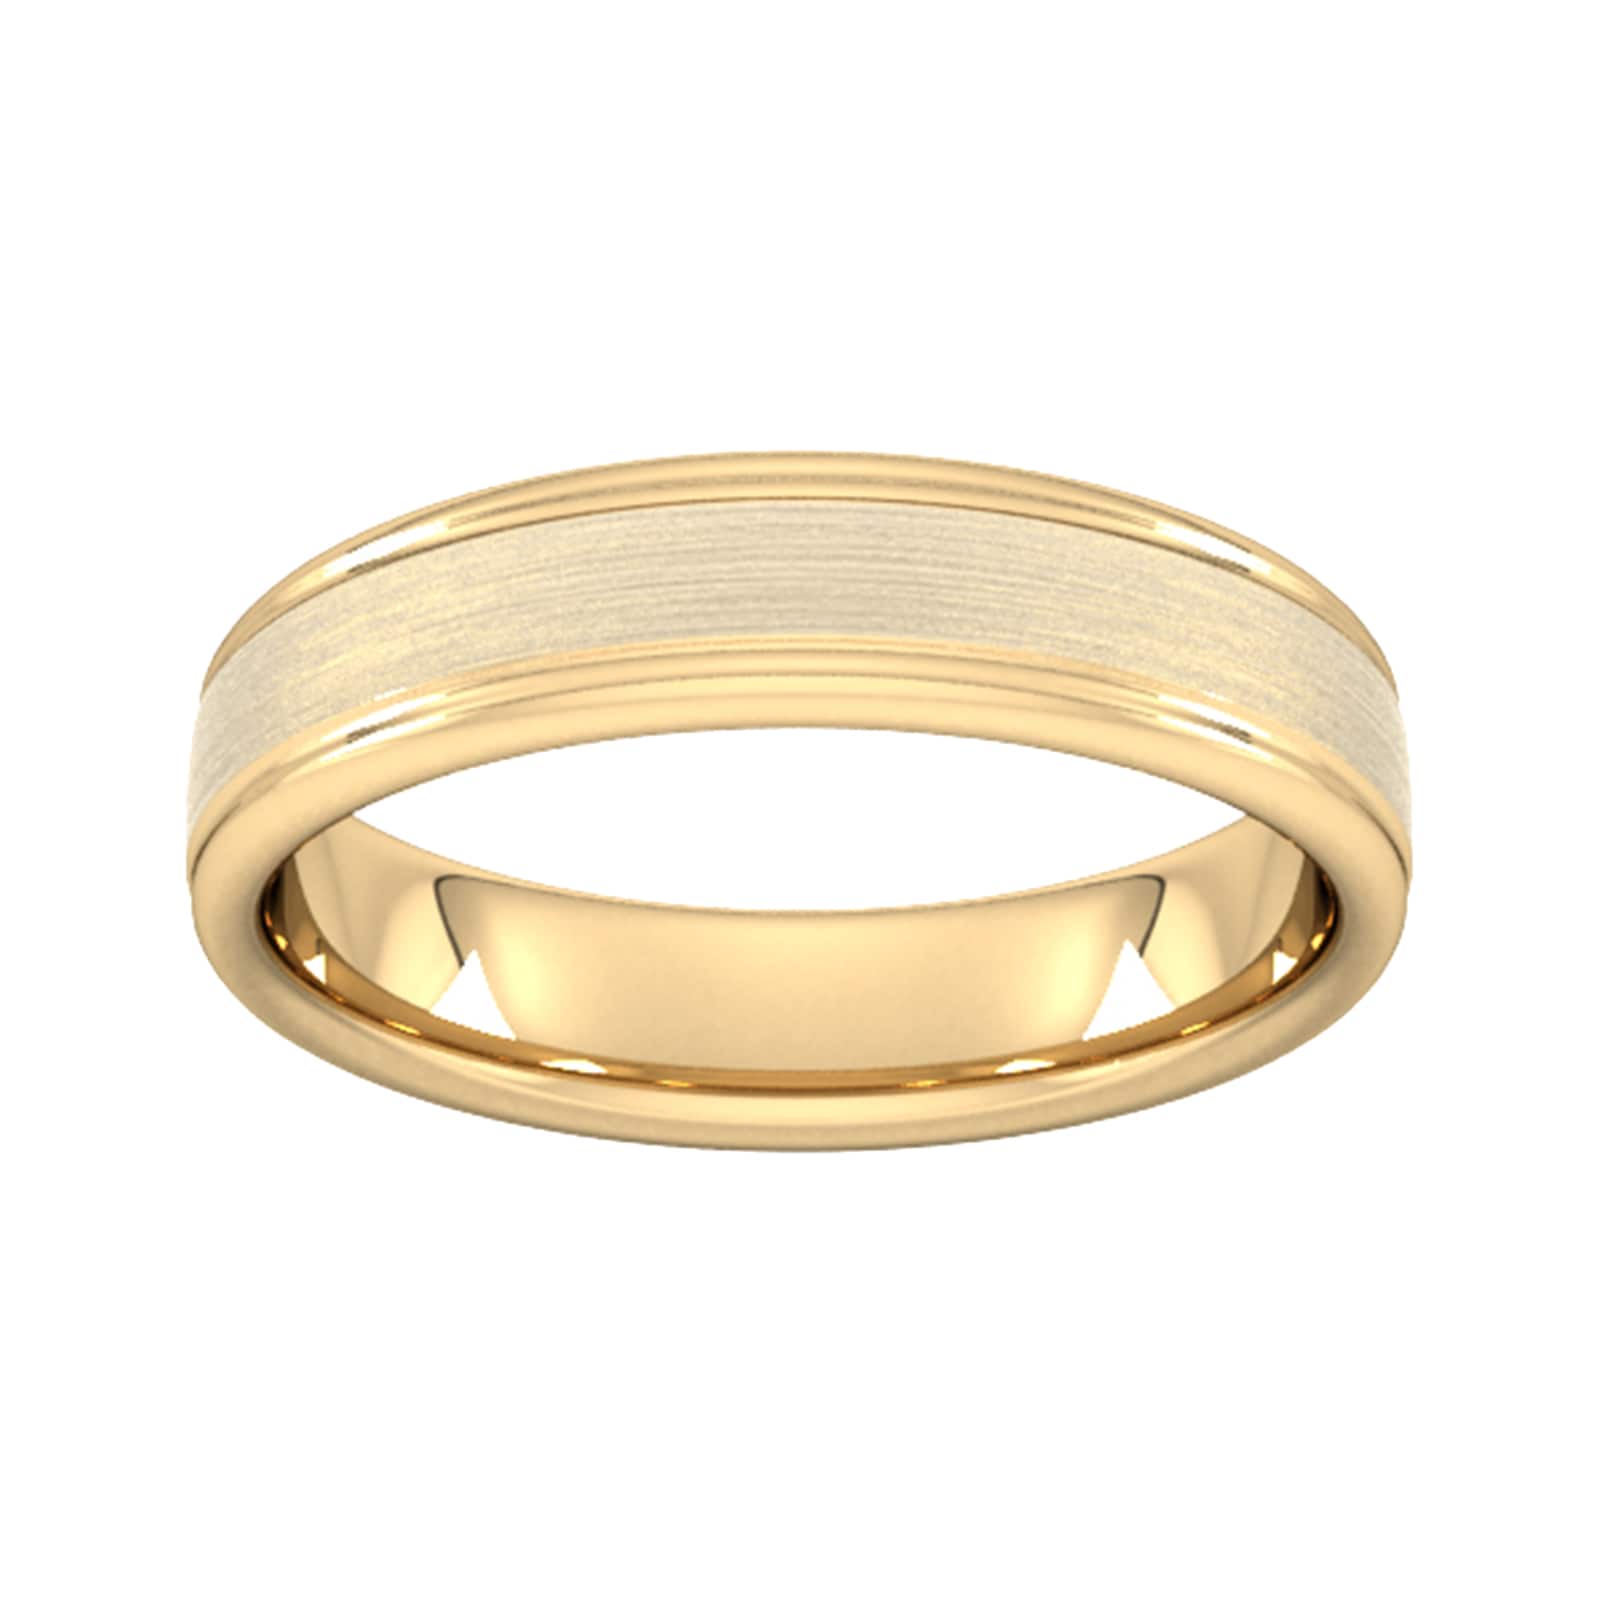 5mm Slight Court Standard Matt Centre With Grooves Wedding Ring In 18 Carat Yellow Gold - Ring Size M